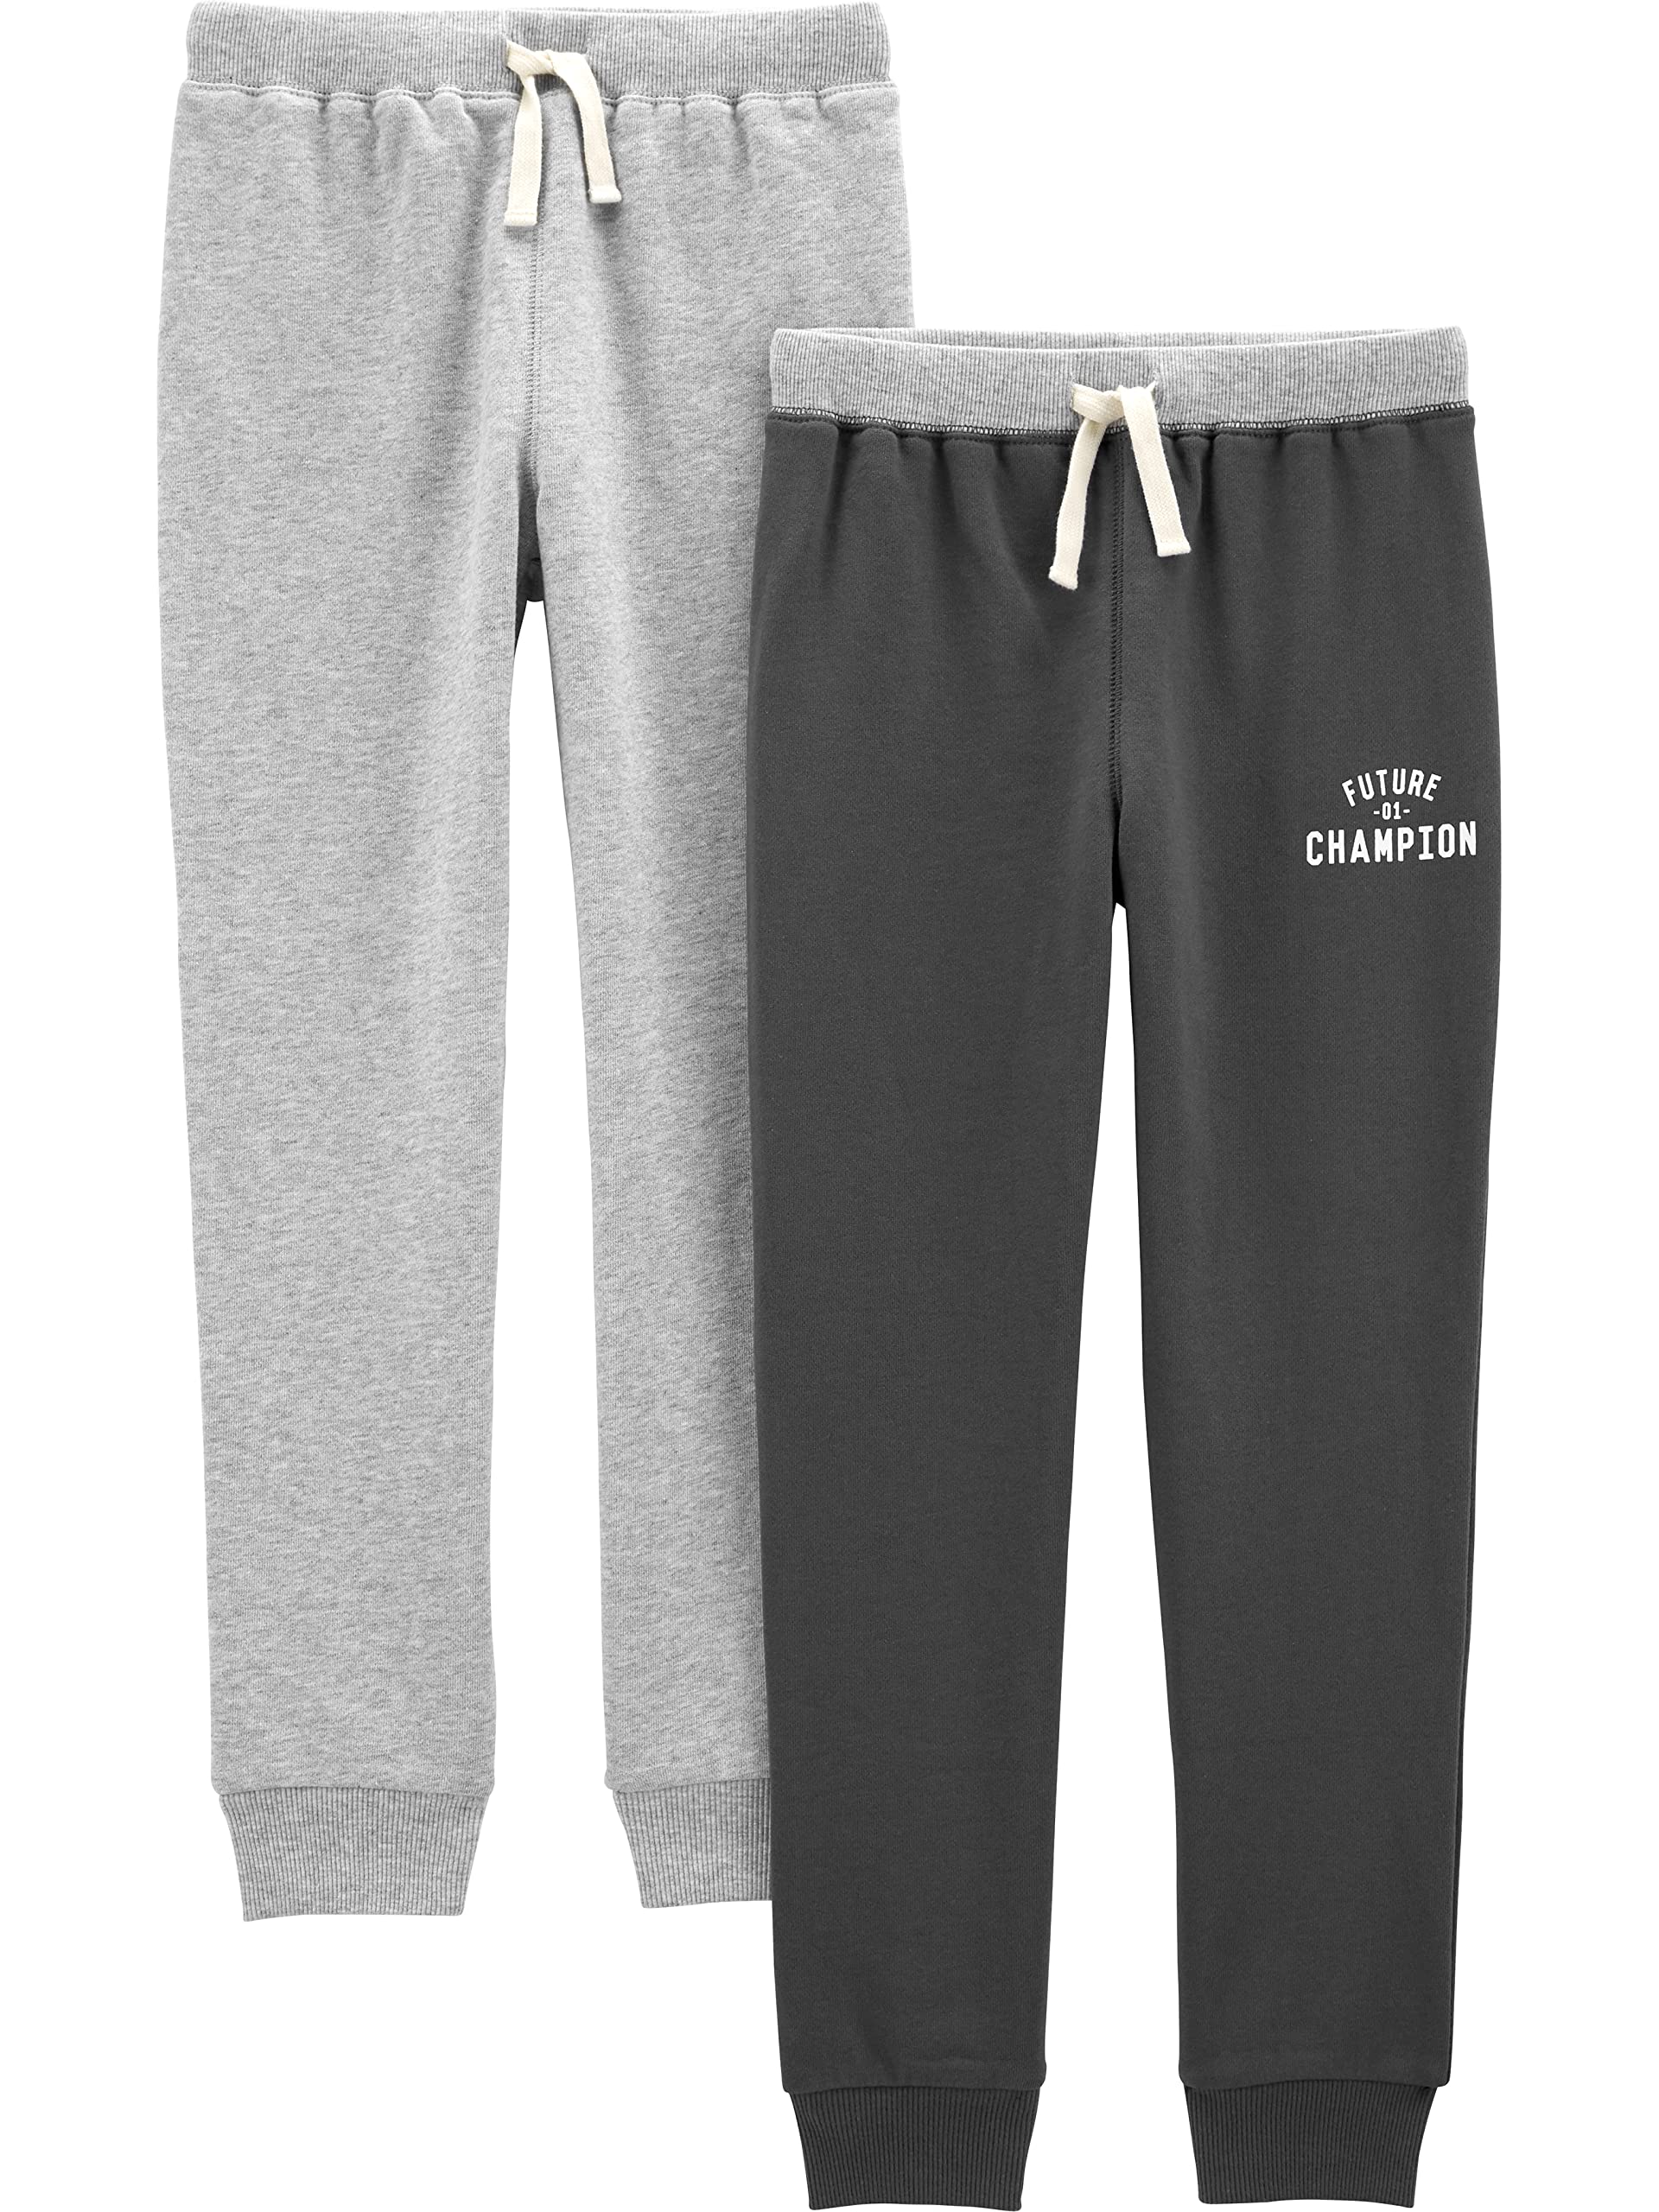 Simple Joys by Carter's Toddlers and Baby Boys' Athletic Knit Jogger Pants, Pack of 2